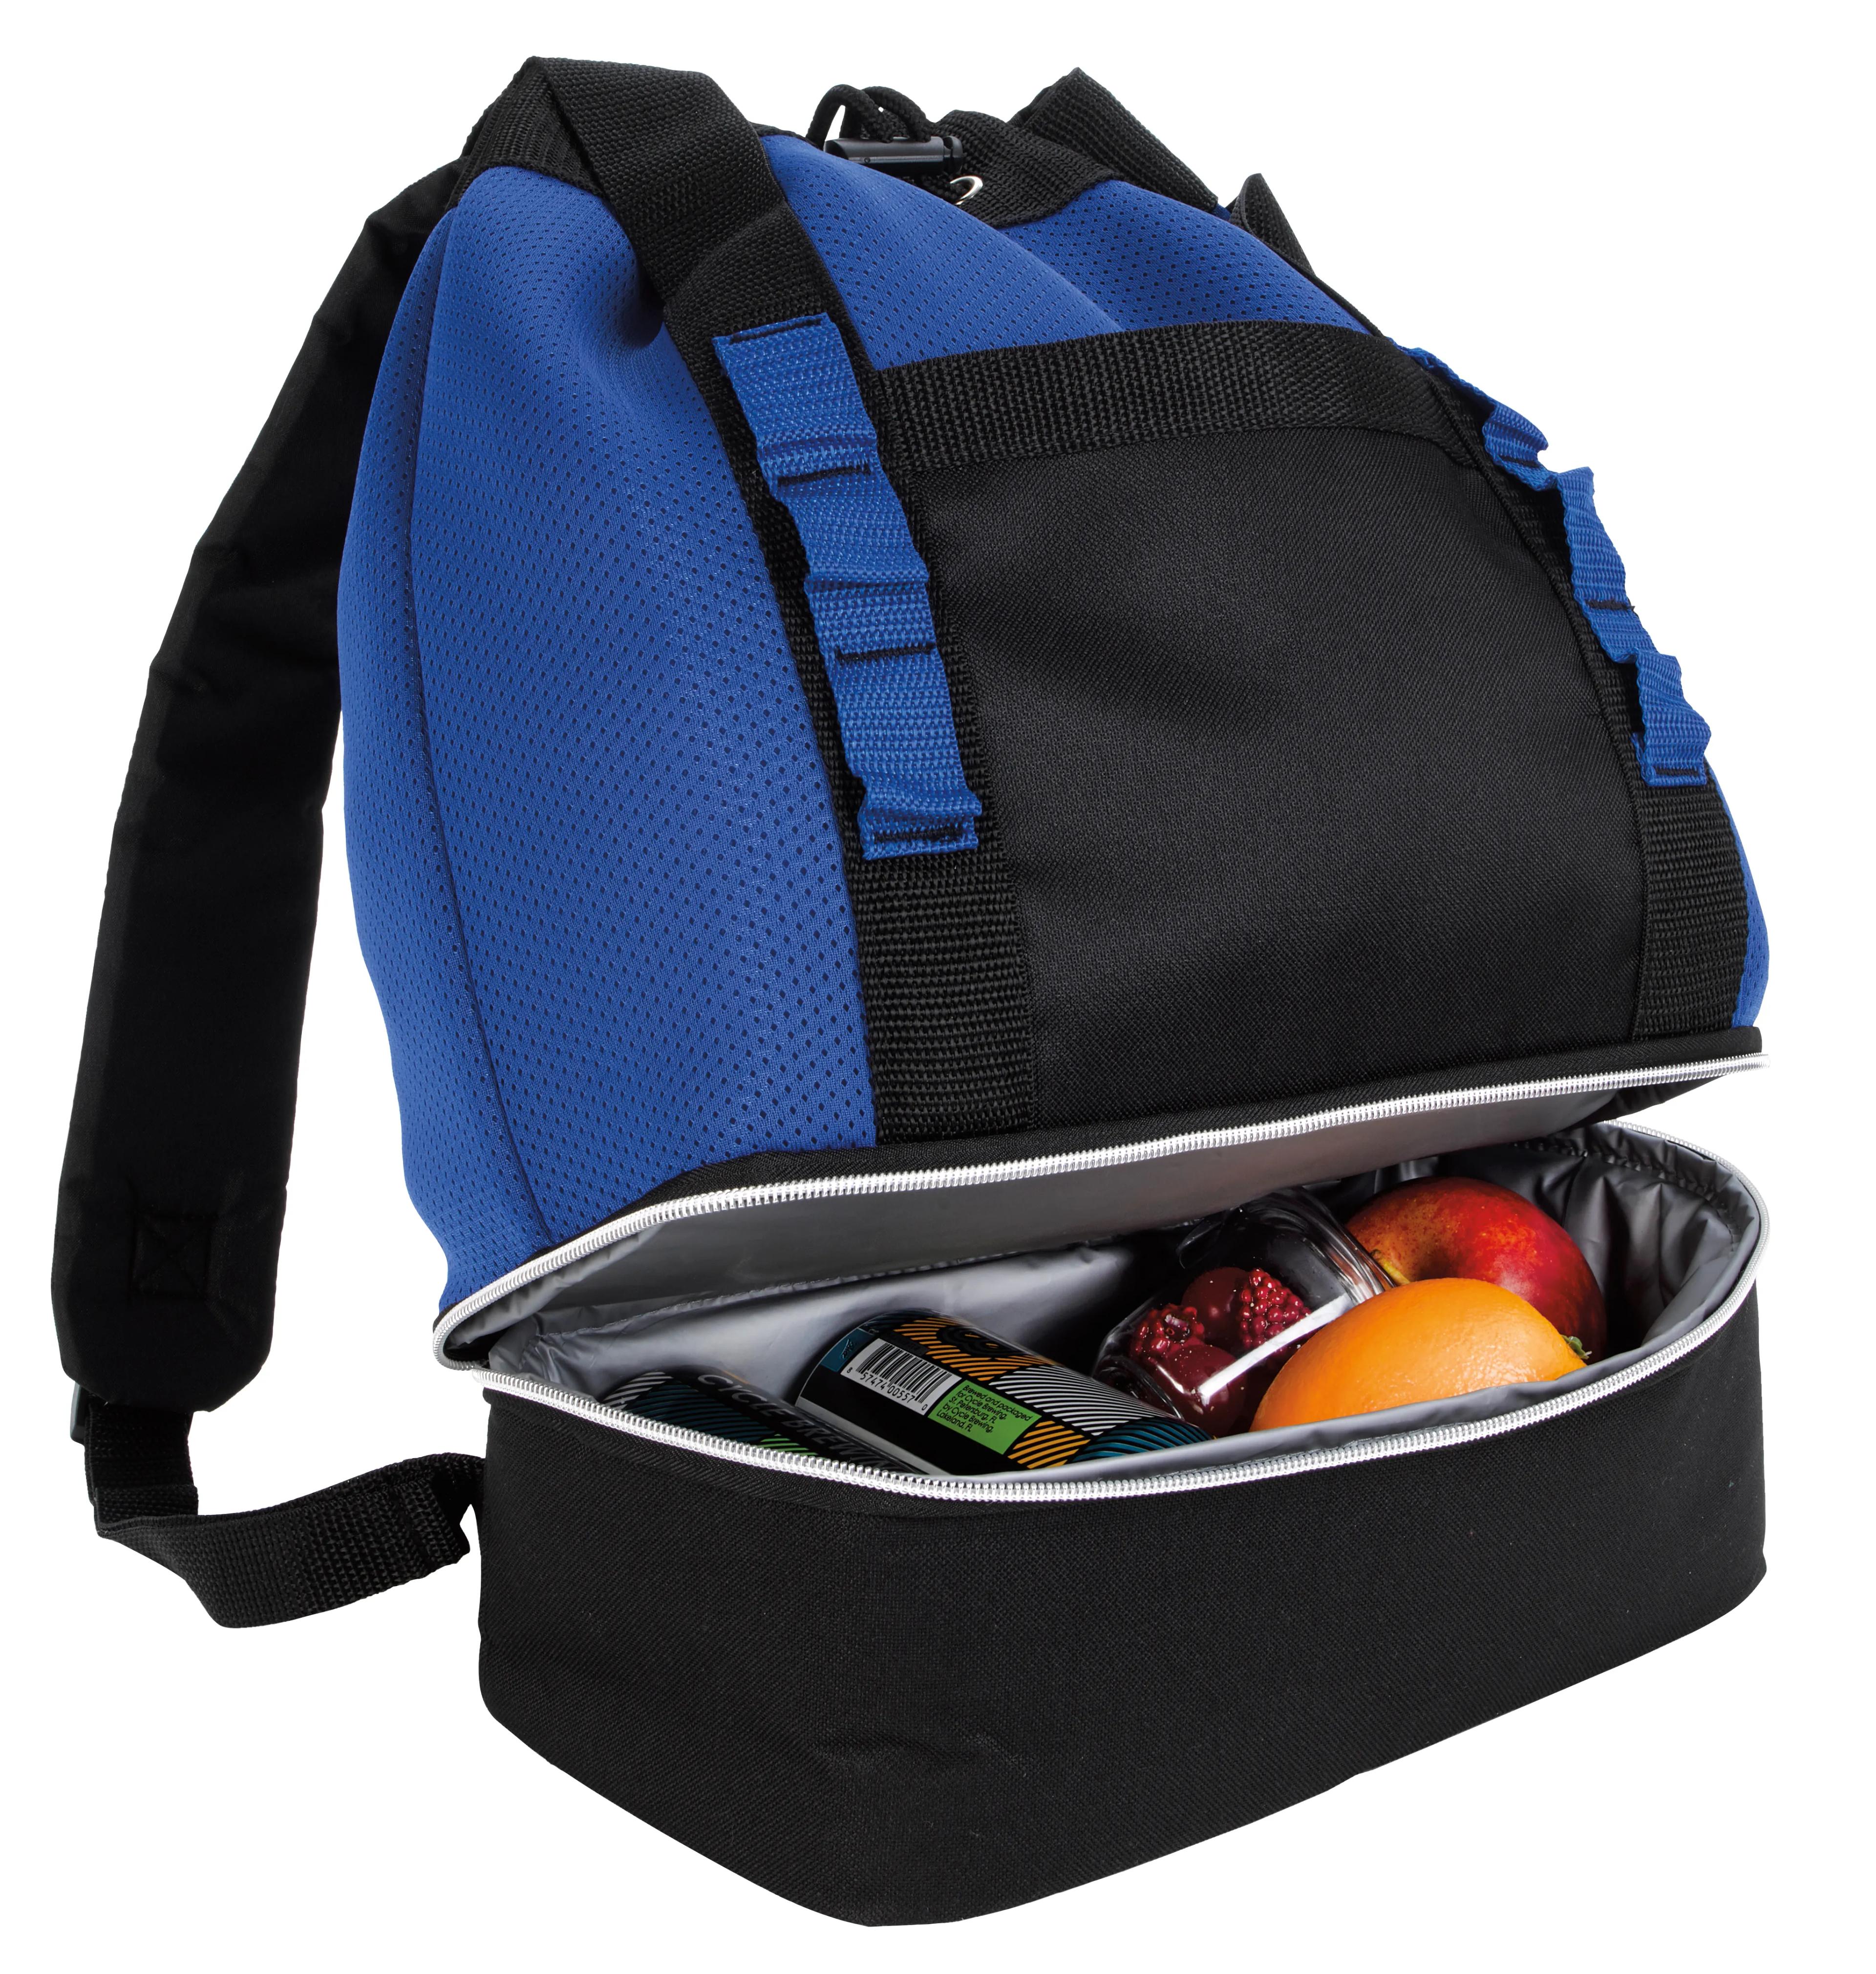 Brightwater Dual-Compartment Tote-Pack Cooler 28 of 43